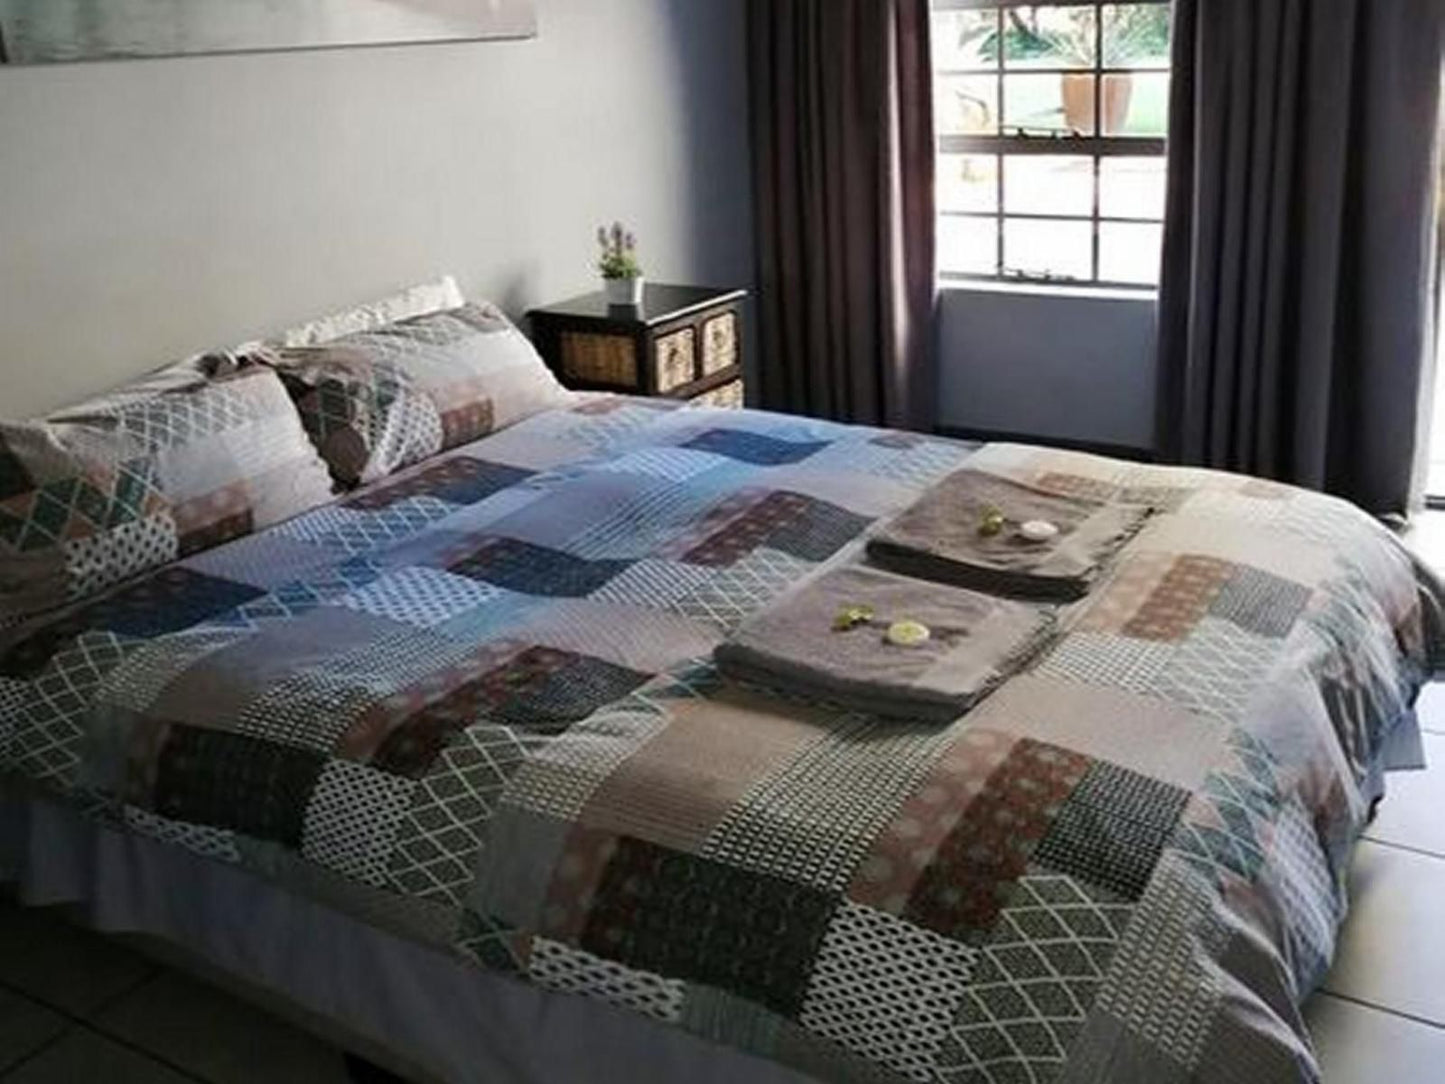 Wildebeespan Bed And Breakfast Delareyville North West Province South Africa Unsaturated, Bedroom